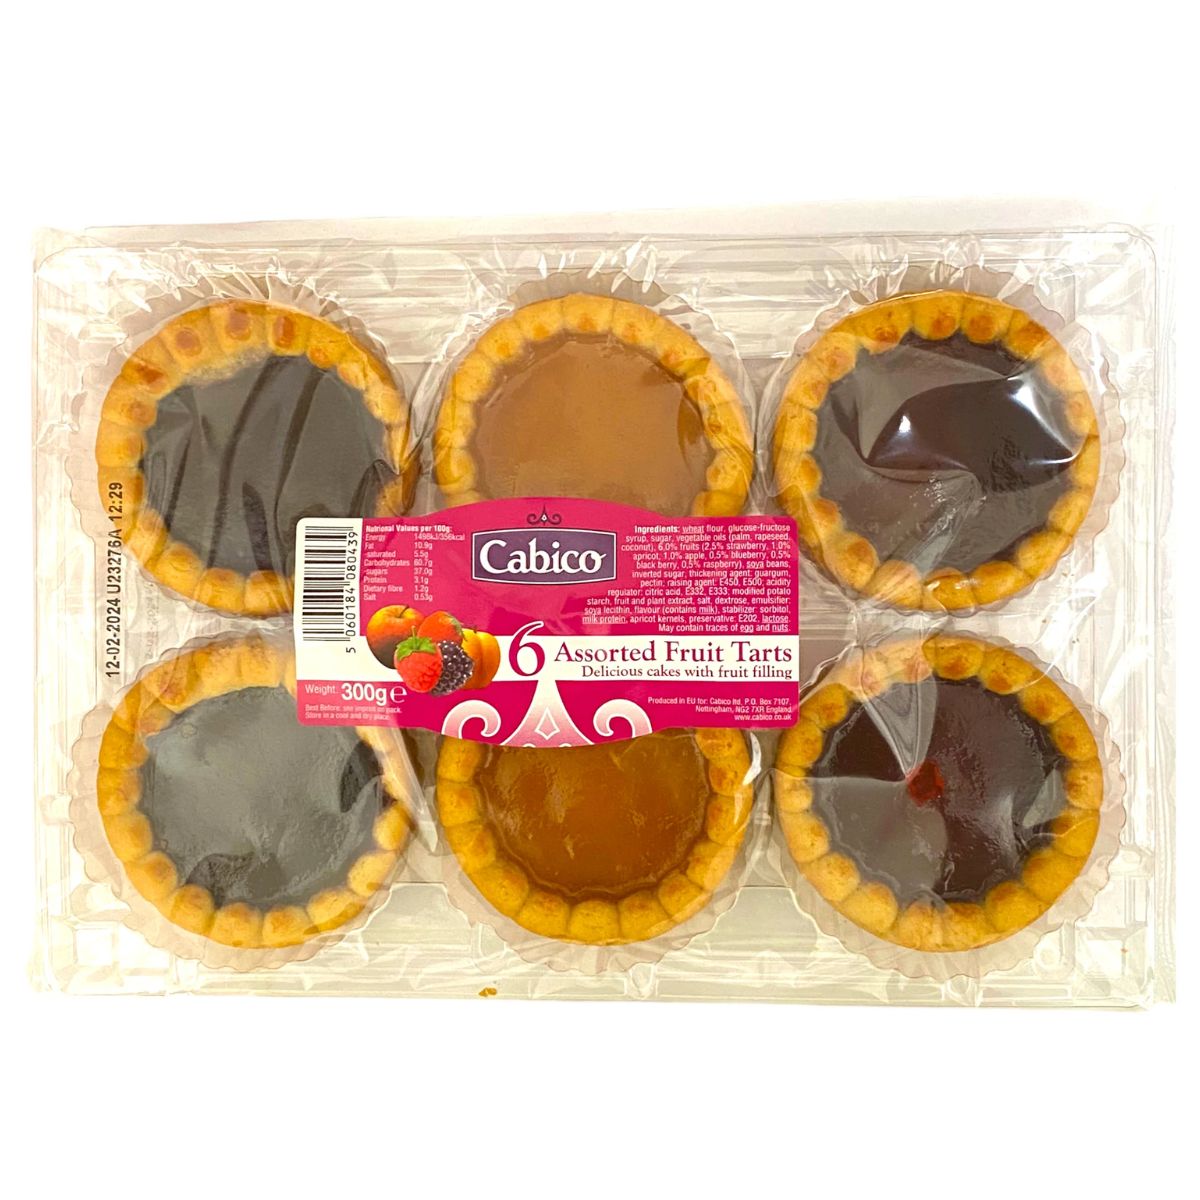 Cabico - 6 Assorted Fruit Tarts - 300g pies in a plastic package on a white background.